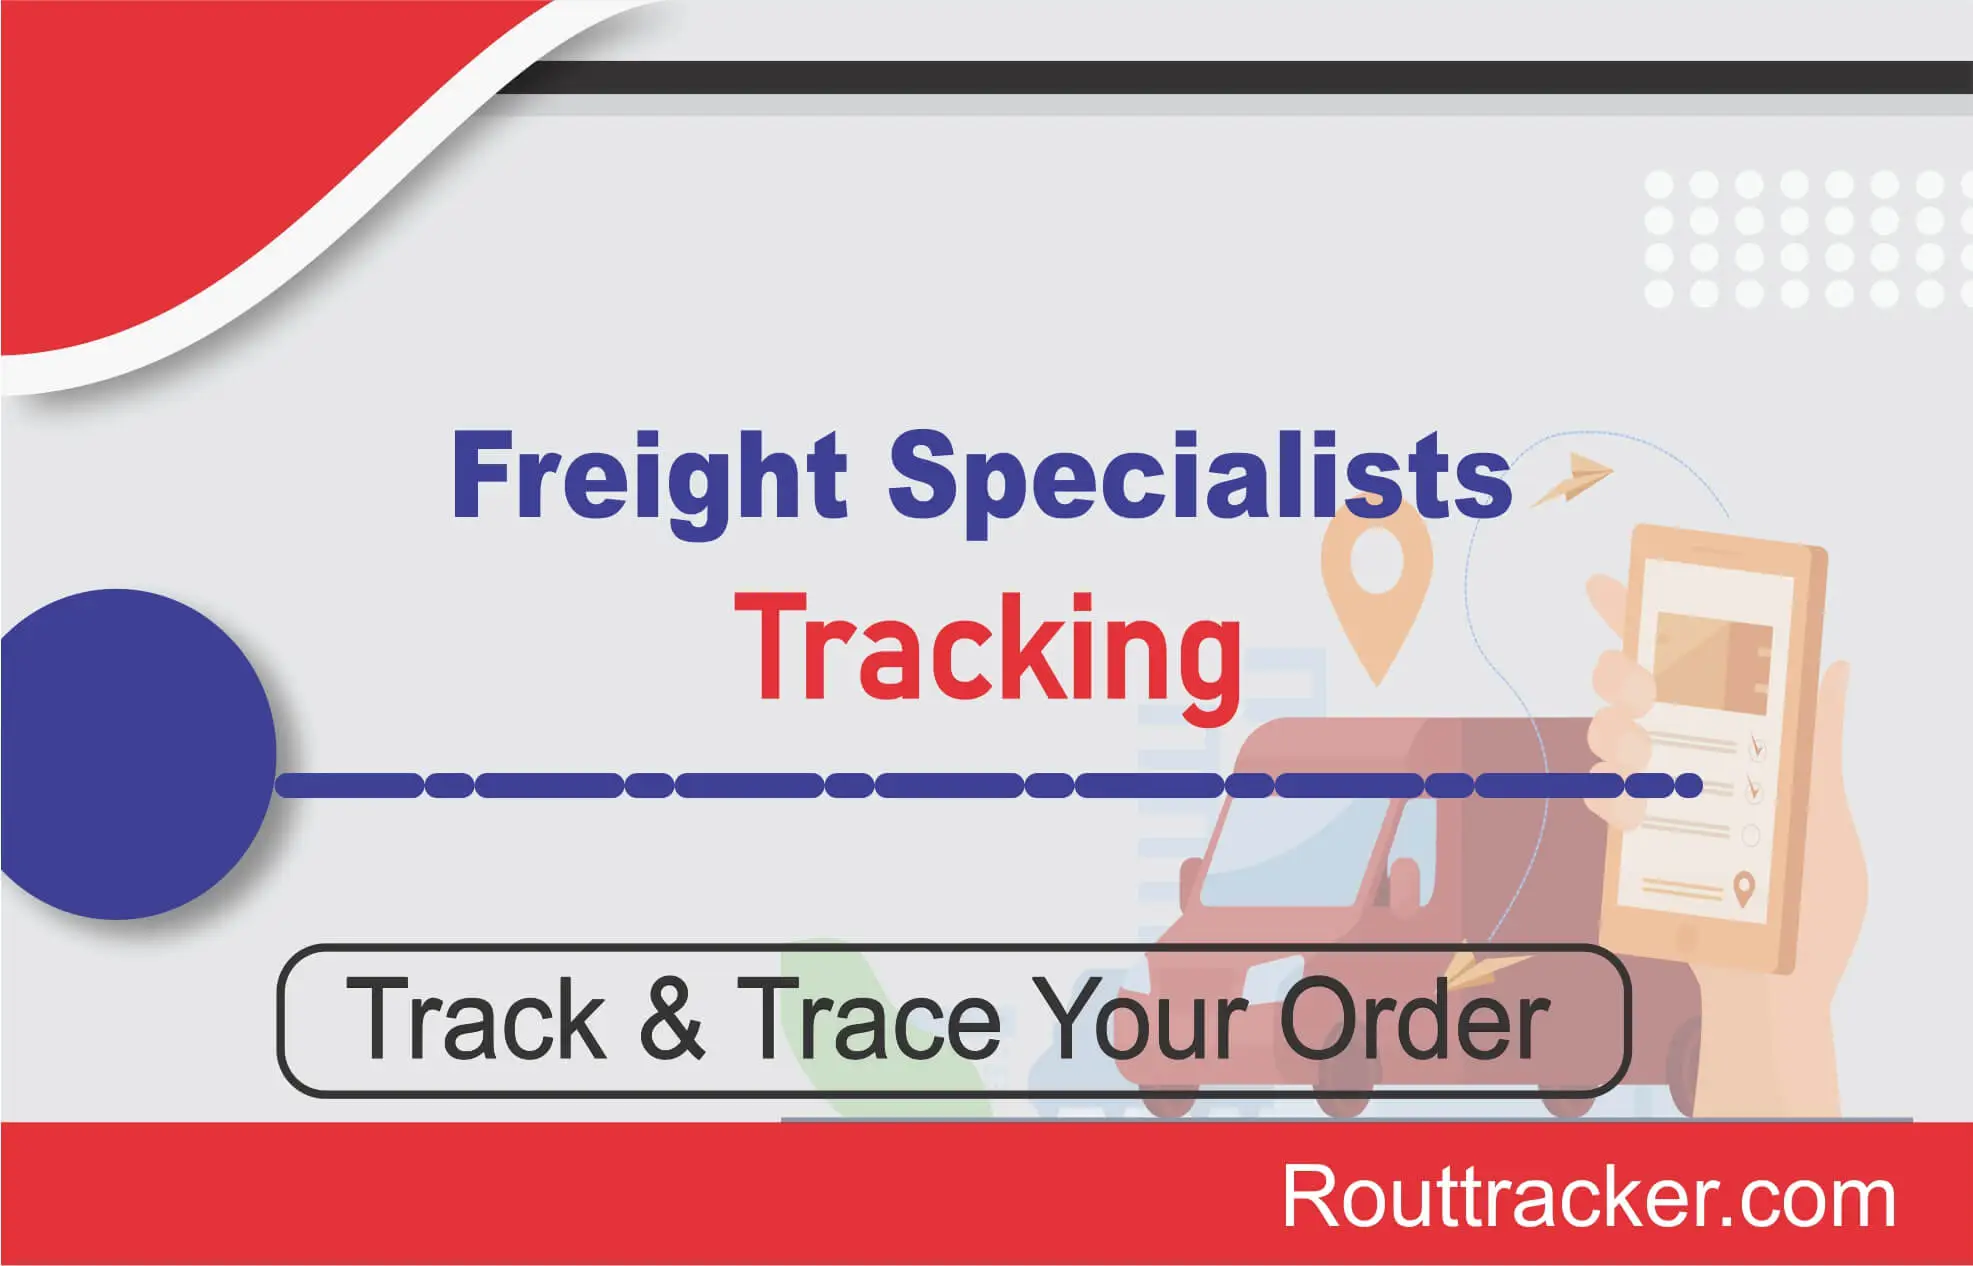 Freight Specialists Tracking